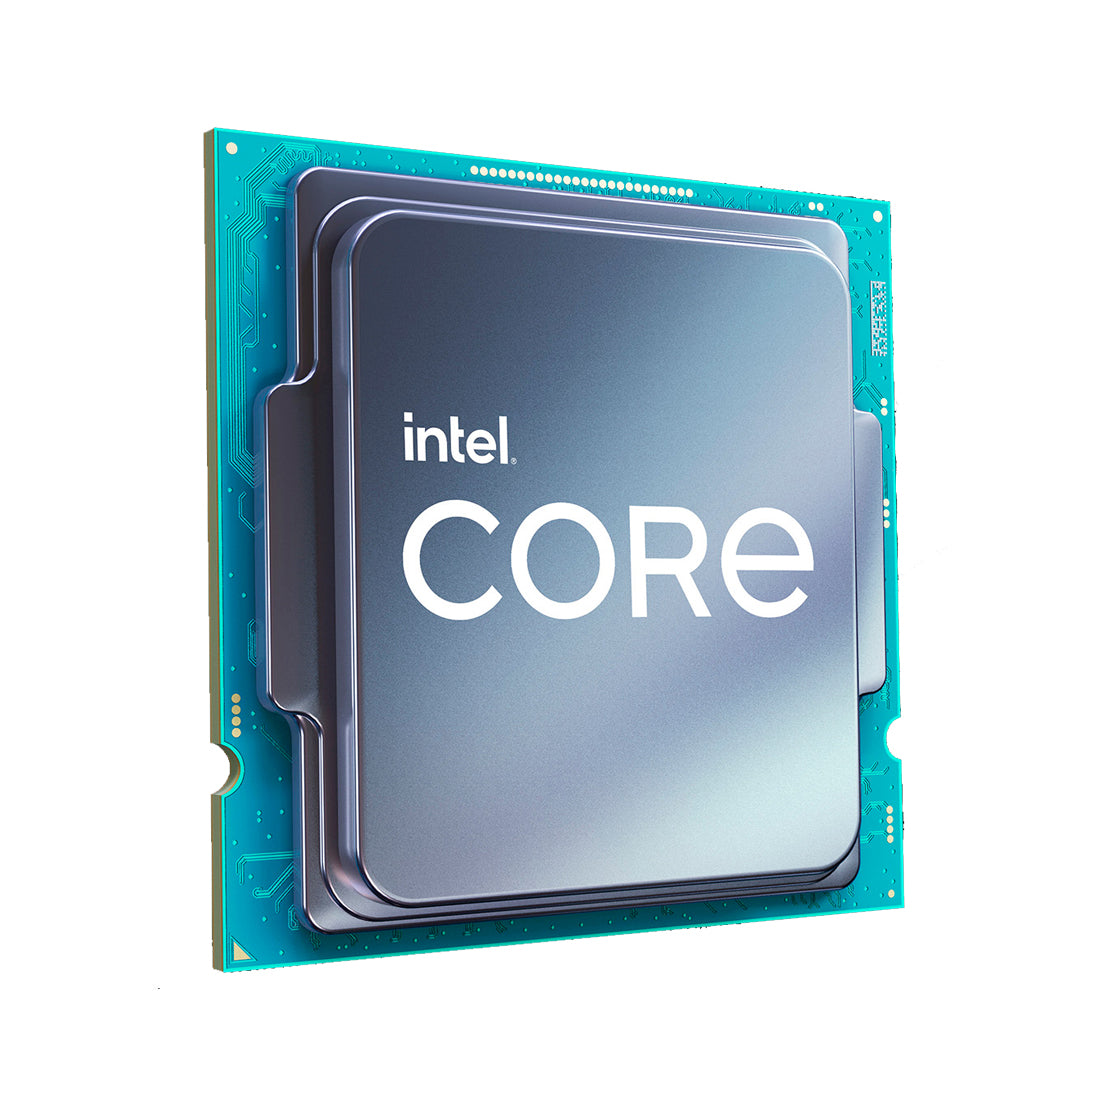 Intel Core i5-11400F Review - The Best Rocket Lake - Rendering